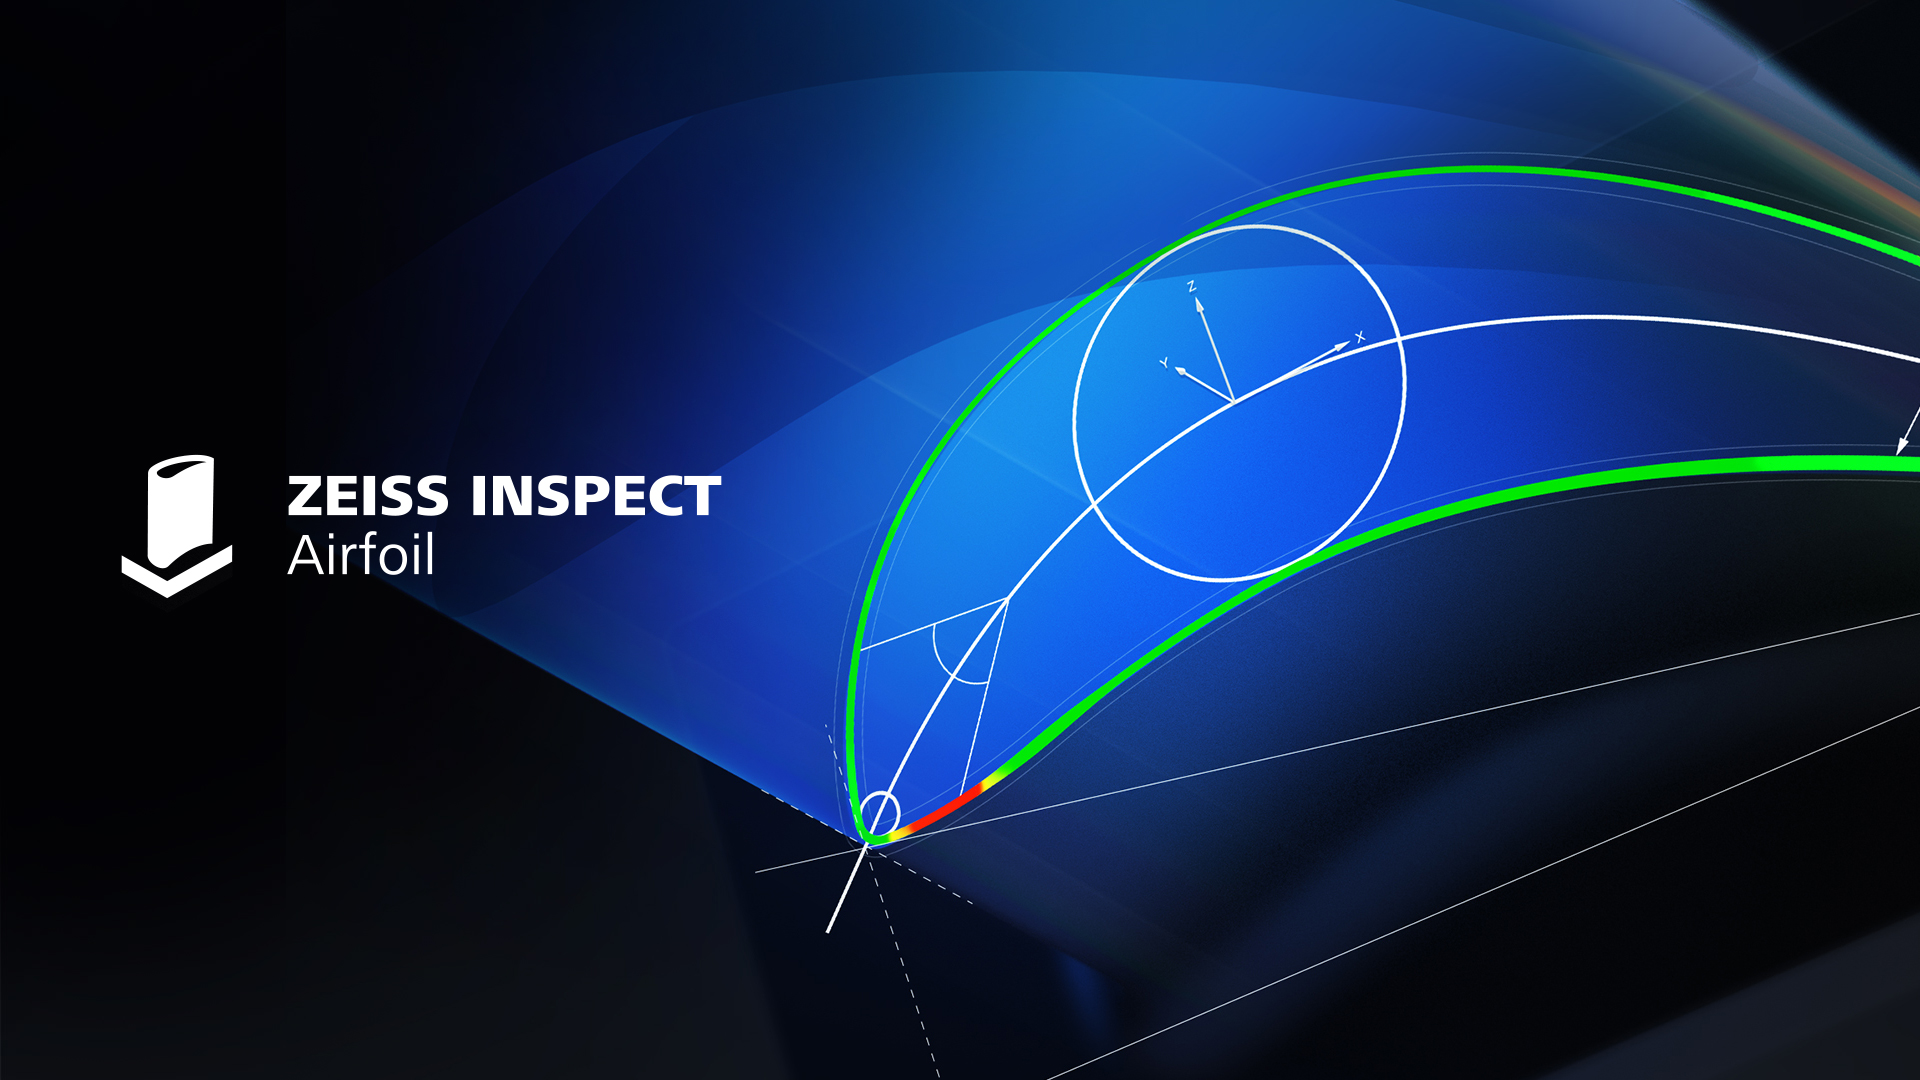 ZEISS INSPECT Airfoil